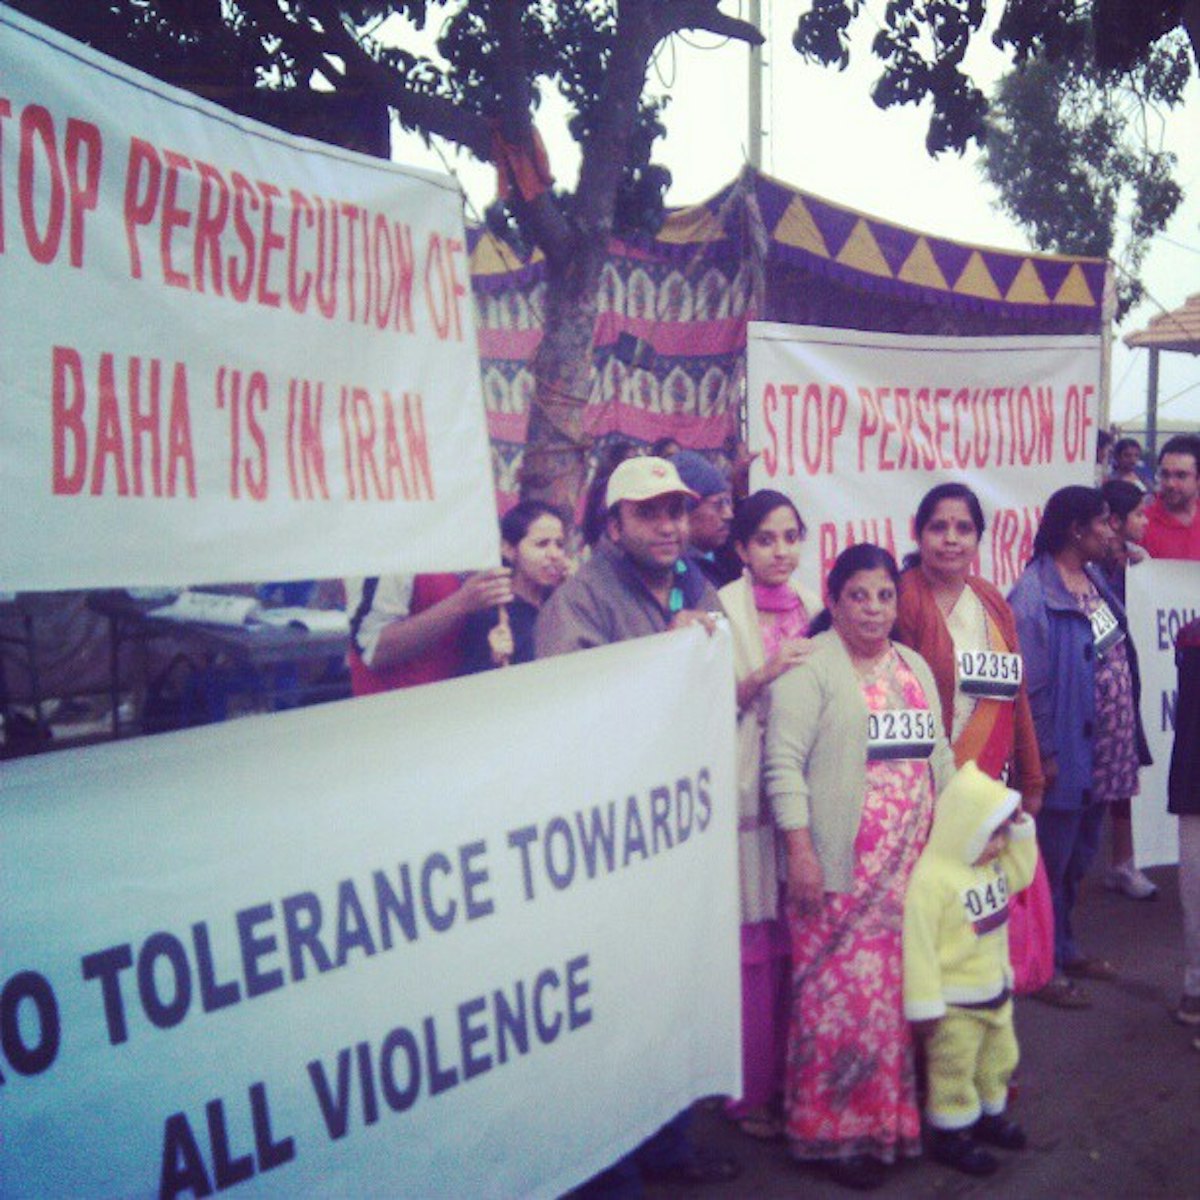 At a marathon, organised by the Classic Road Runners Athletic Club of Bangalore, spectators carried banners calling for the release of prisoners of conscience in Iran.